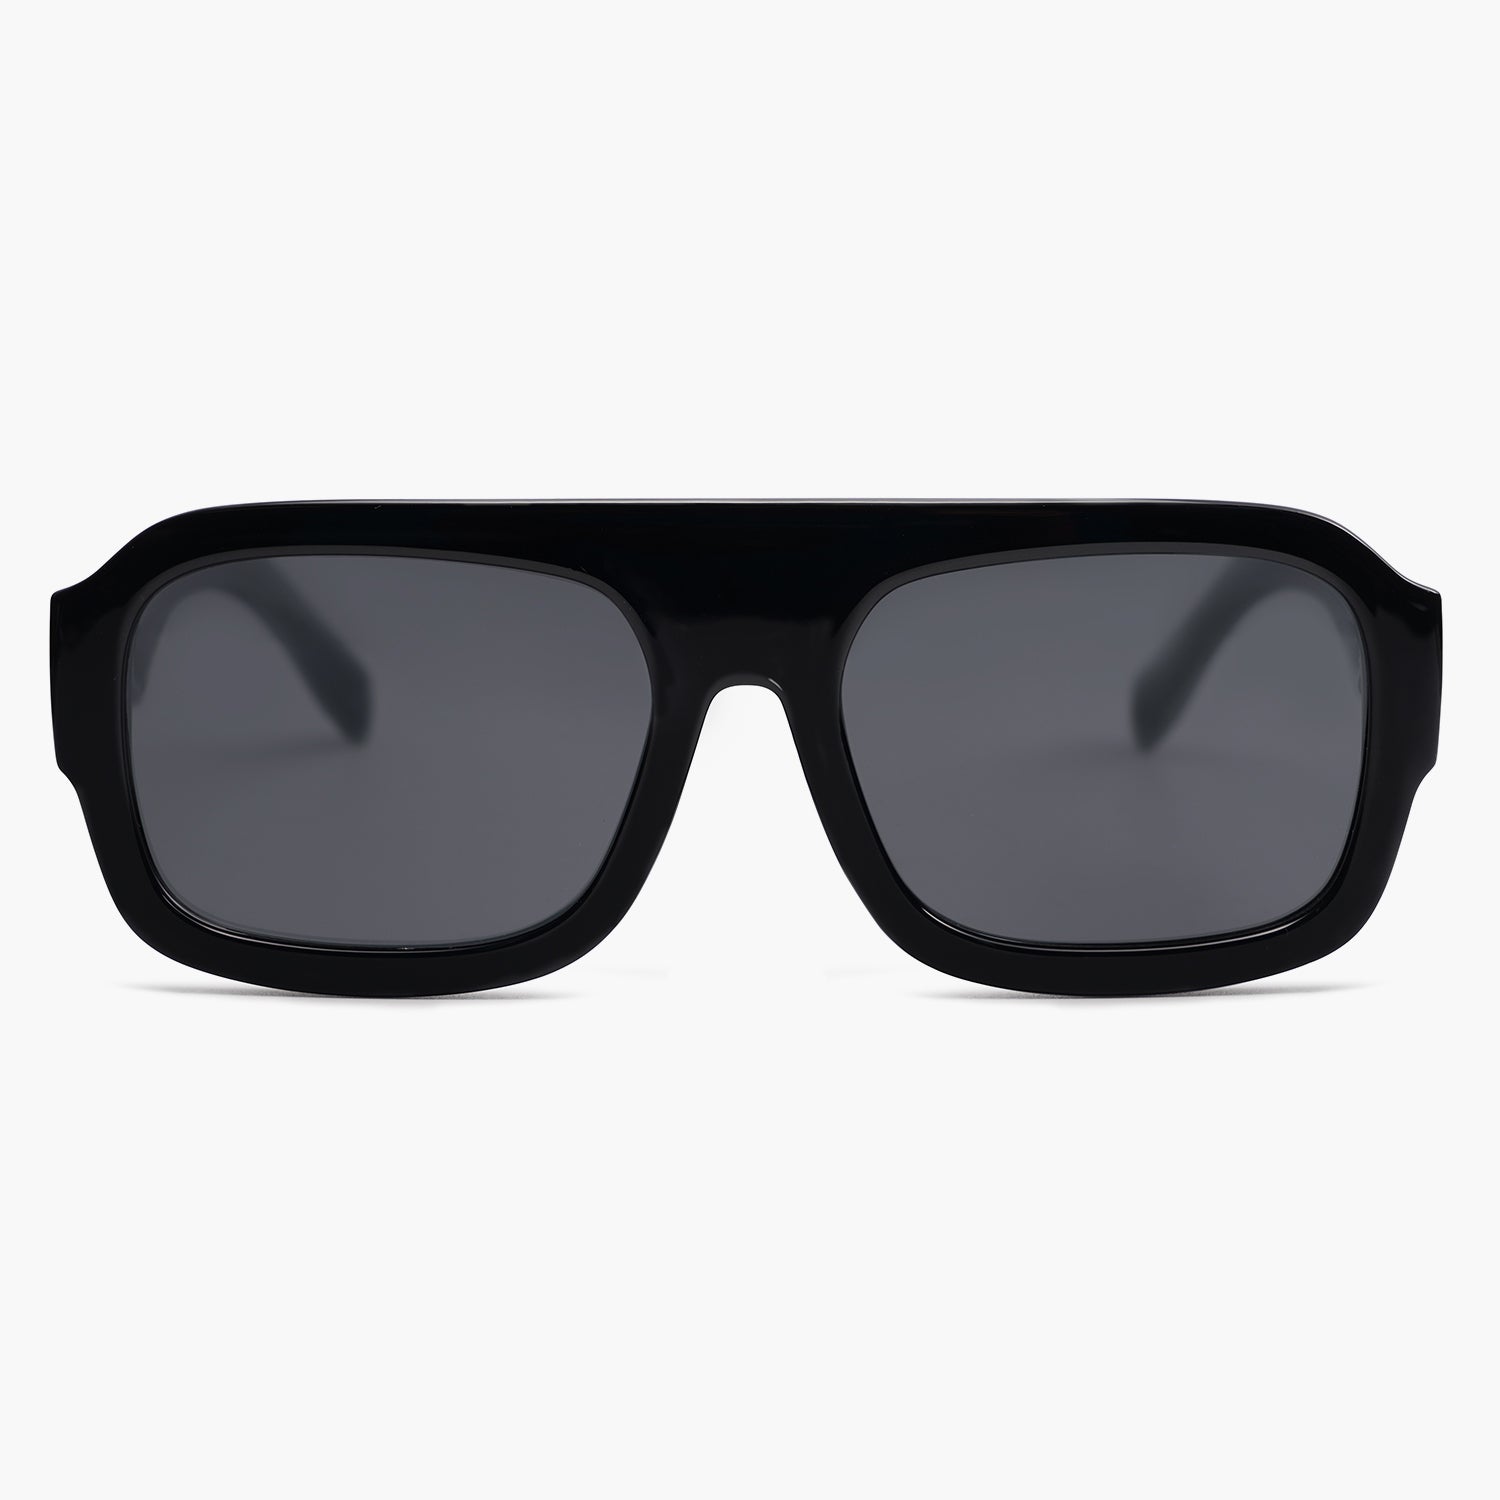 Enjoy your chic summer day with black square sunglasses – SOJOS